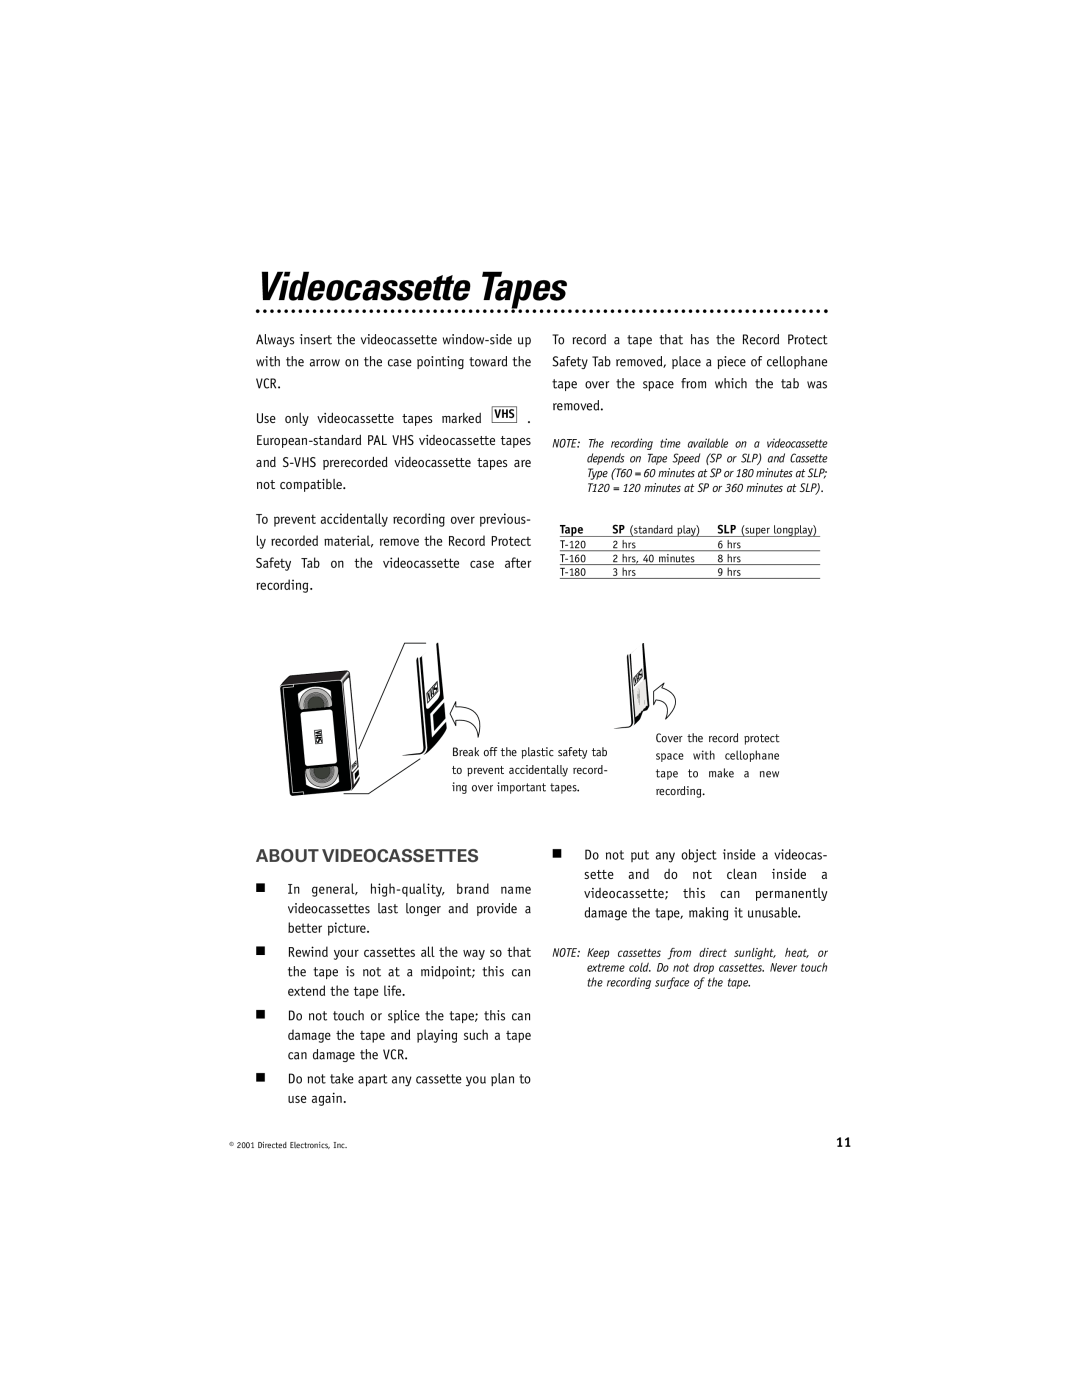 Directed Electronics VC2010 manual Videocassette Tapes, About Videocassettes 